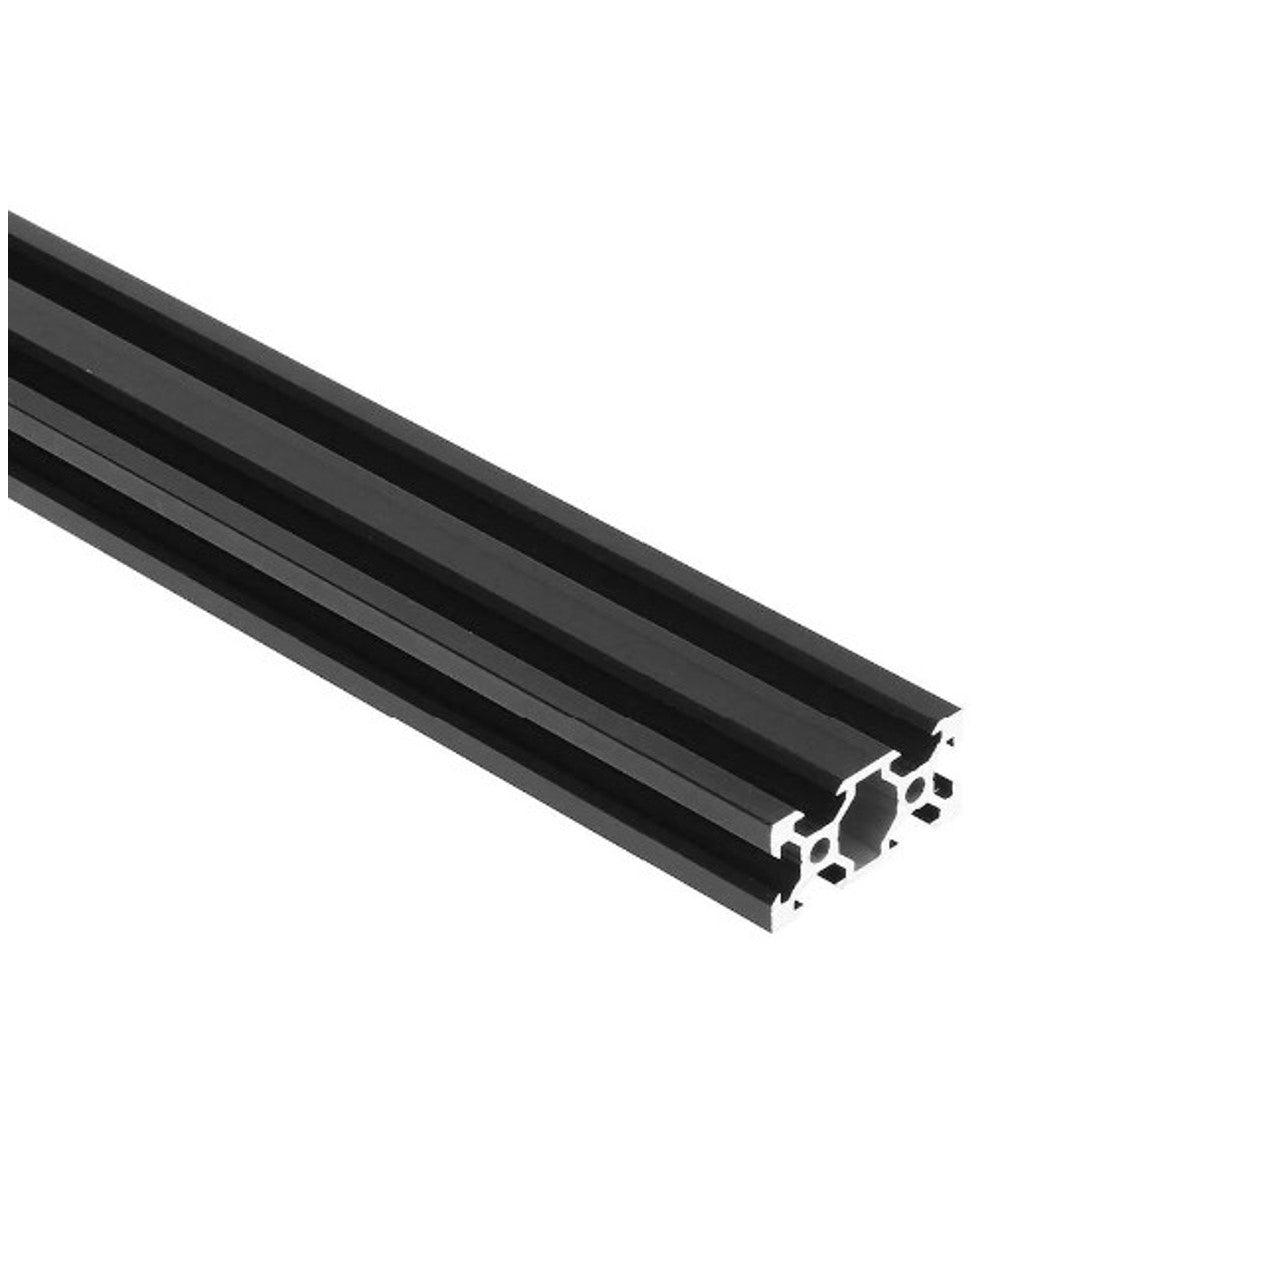 1" x 2" Black Smooth T-Slotted Aluminum Extrusion - 3ft Bar - Forces Inc